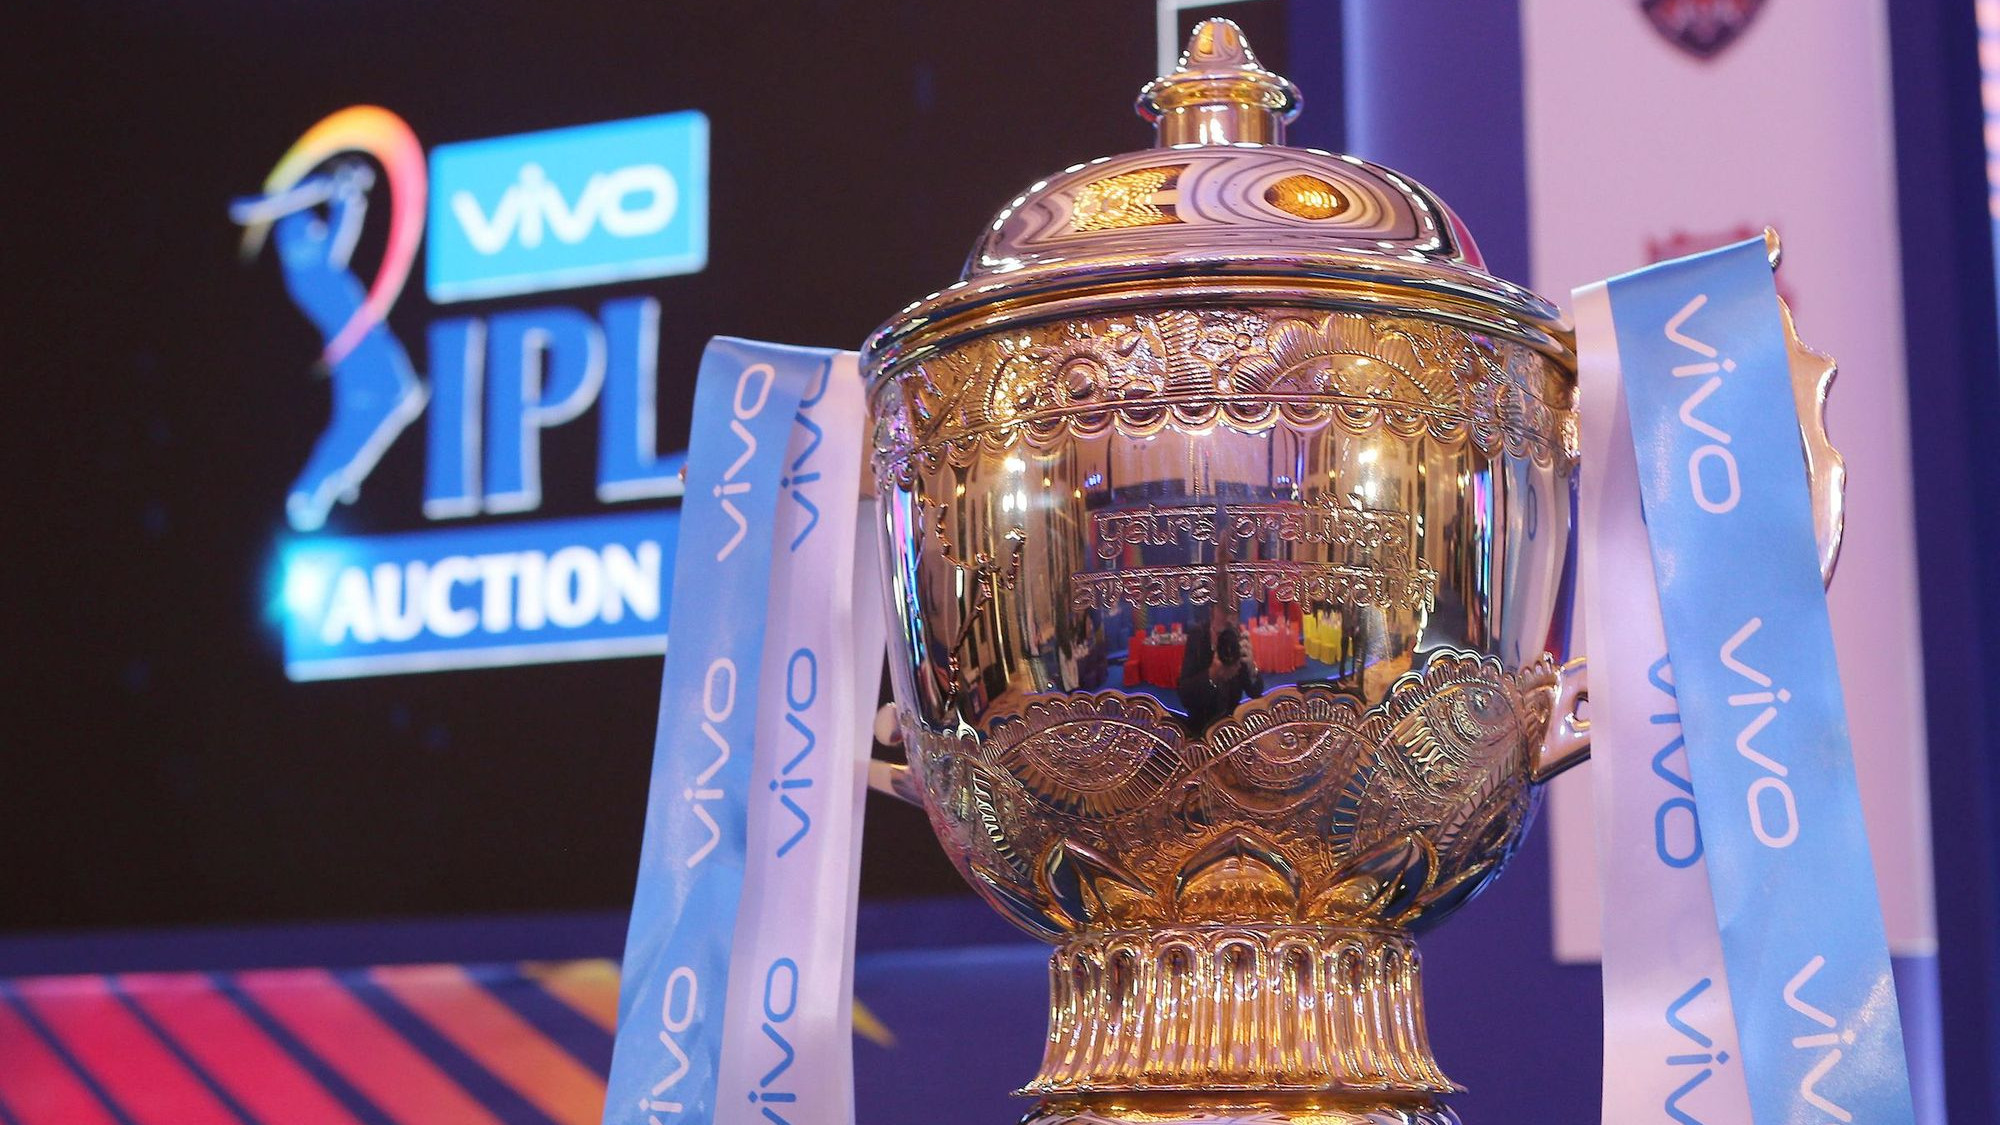 IPL 2021: 292 players set to go under the hammer in the VIVO IPL auction